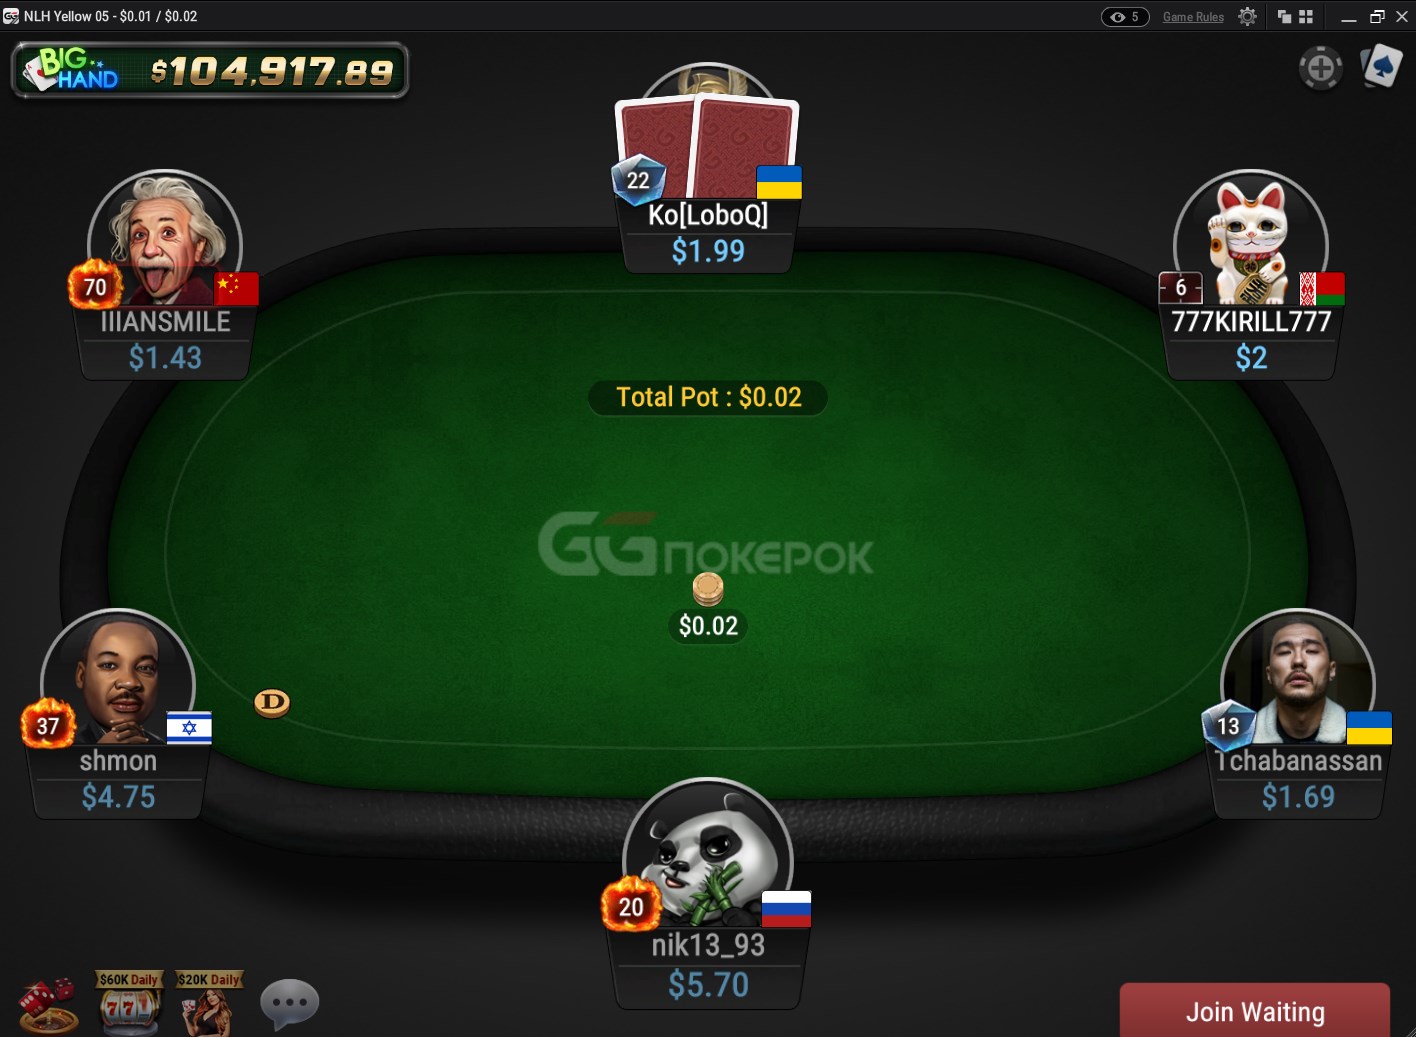 The speed of the game in Rush and Cash poker is not inferior to PokerStars. 